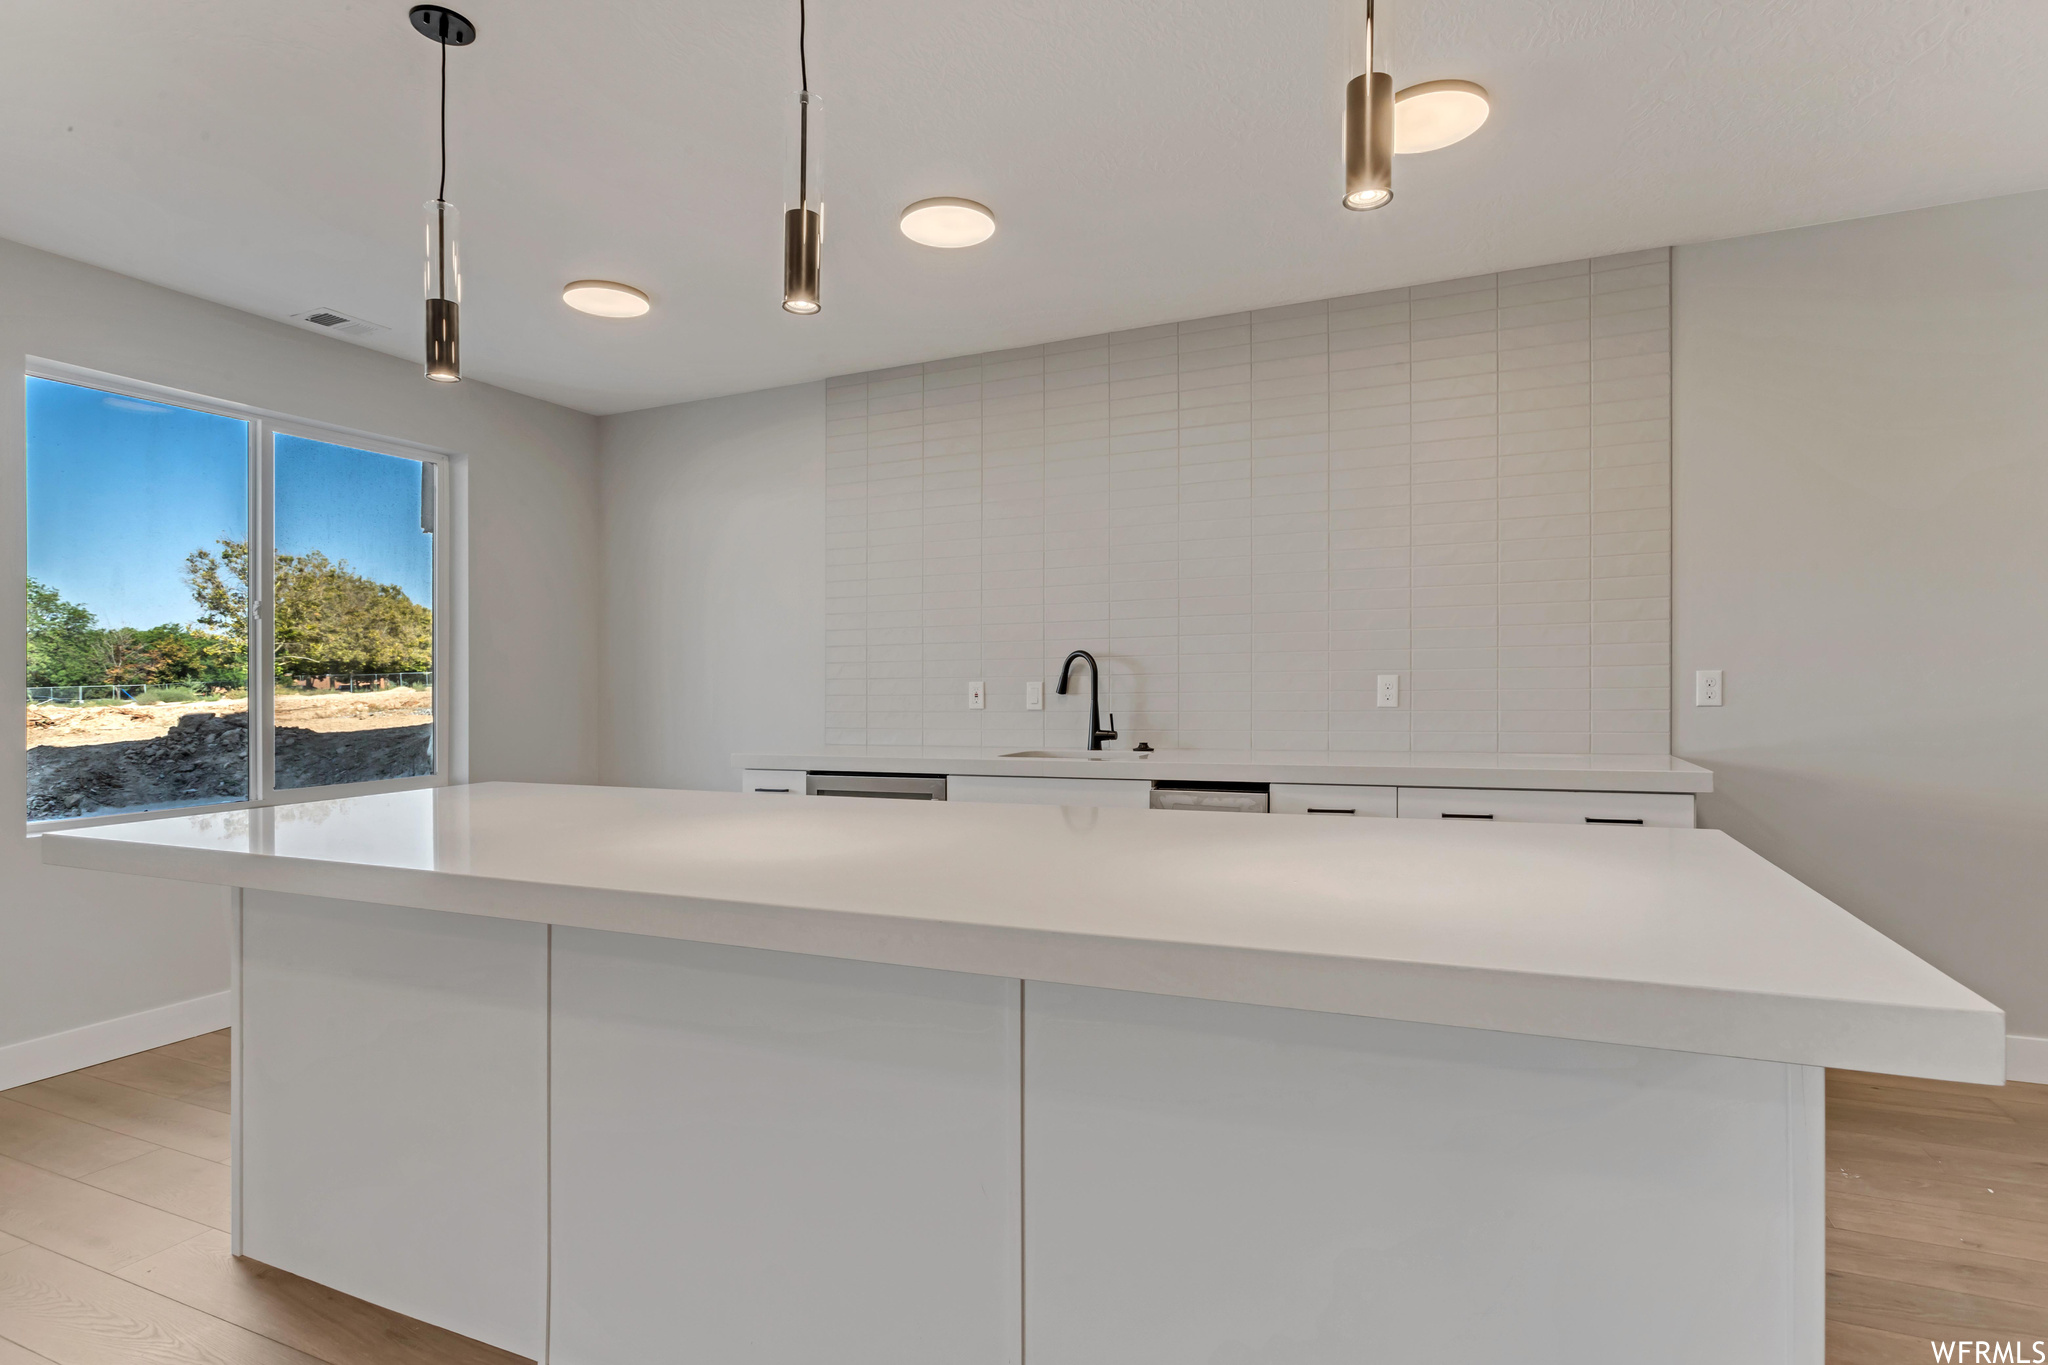 The homeowner opted to keep this area light and bright with white cabinets and pretty pendant lights